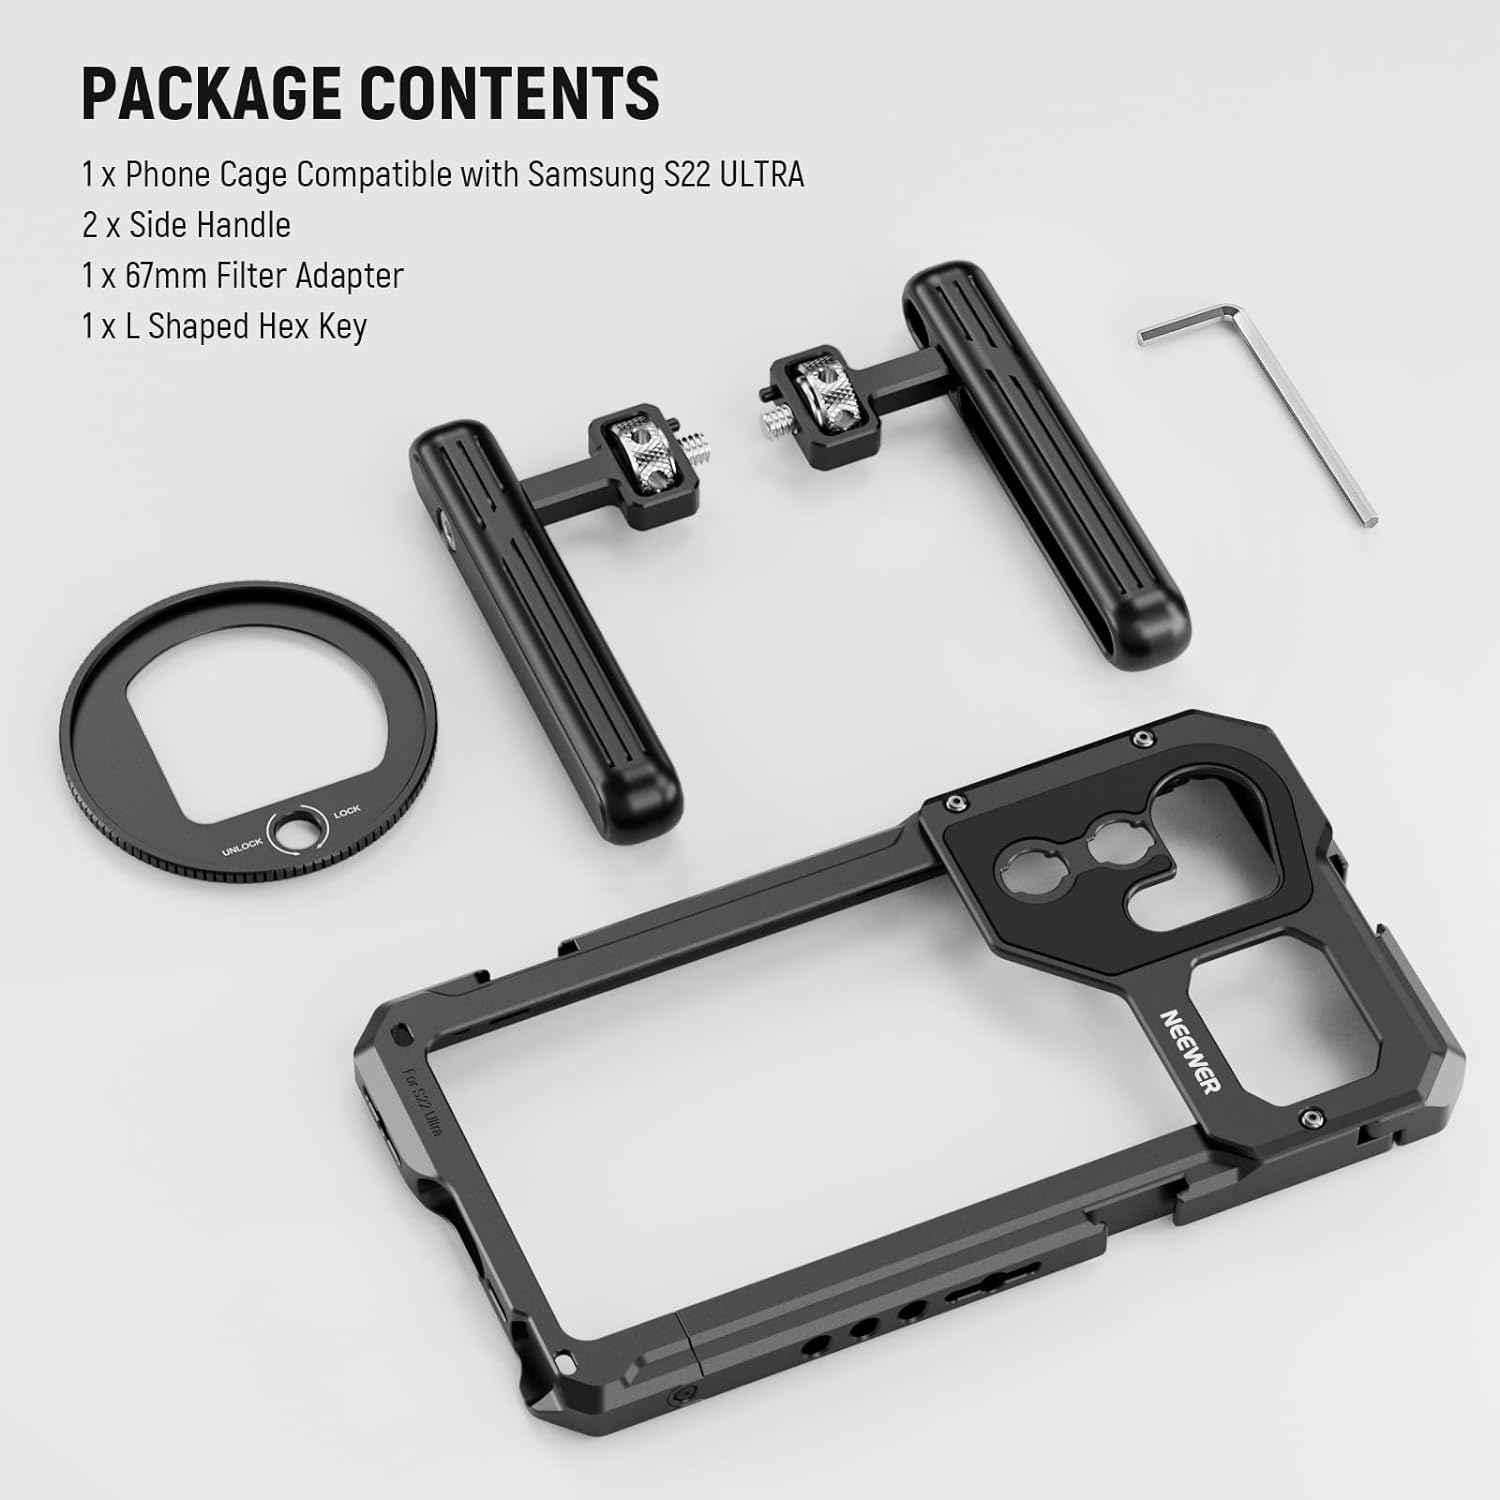 NEEWER S22 Ultra Phone Cage Video Rig Kit with Dual Side Handles, 67mm Lens Filter Thread Adapter, All Metal Smartphone Stabilizer for Filming Video Recording Compatible with Samsung S22 Ultra, PA016